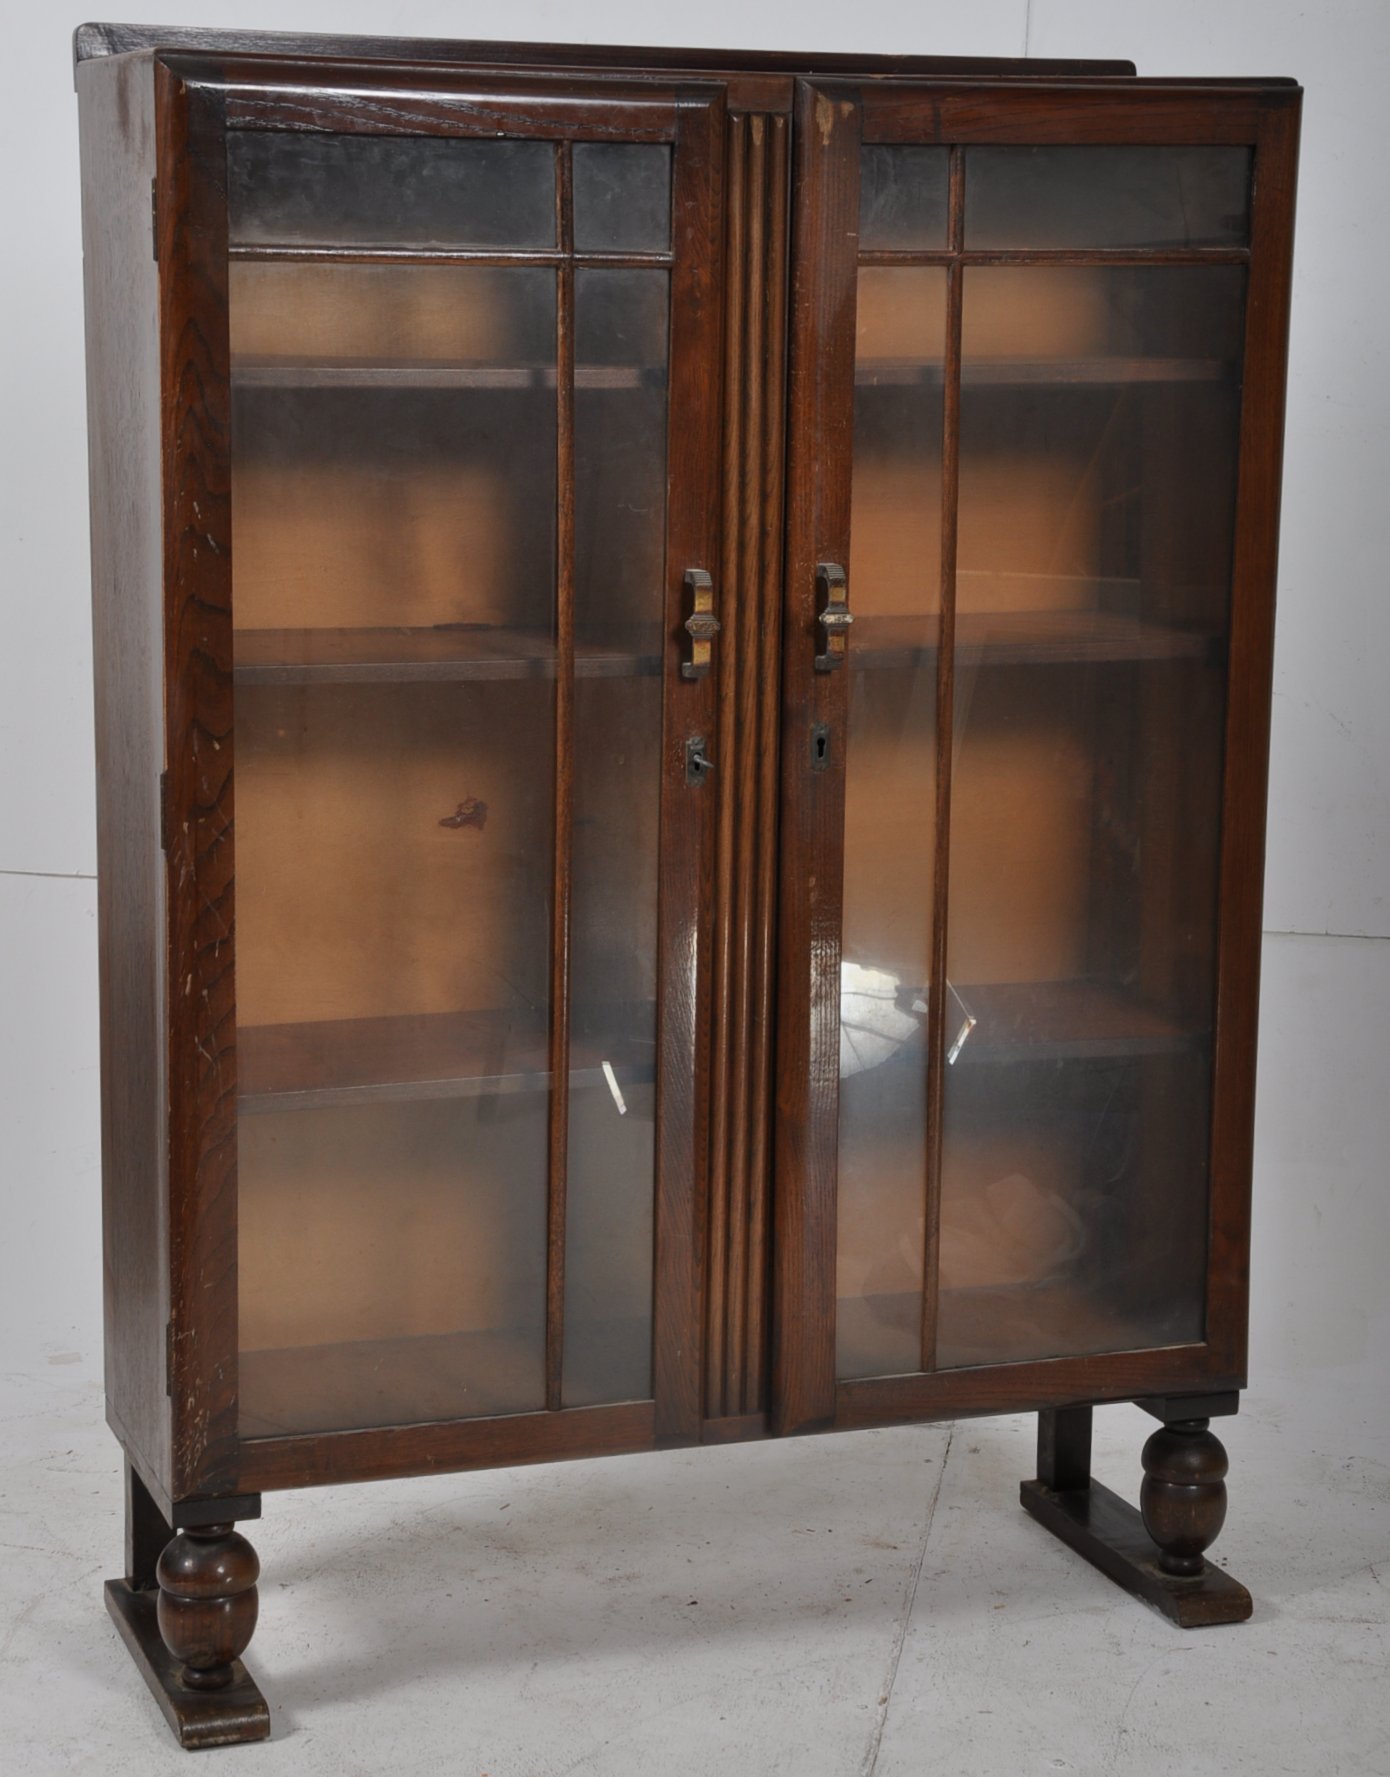 1930's Art Deco bookcase display cabinet. The two glazed doors having shelves within on raised legs.